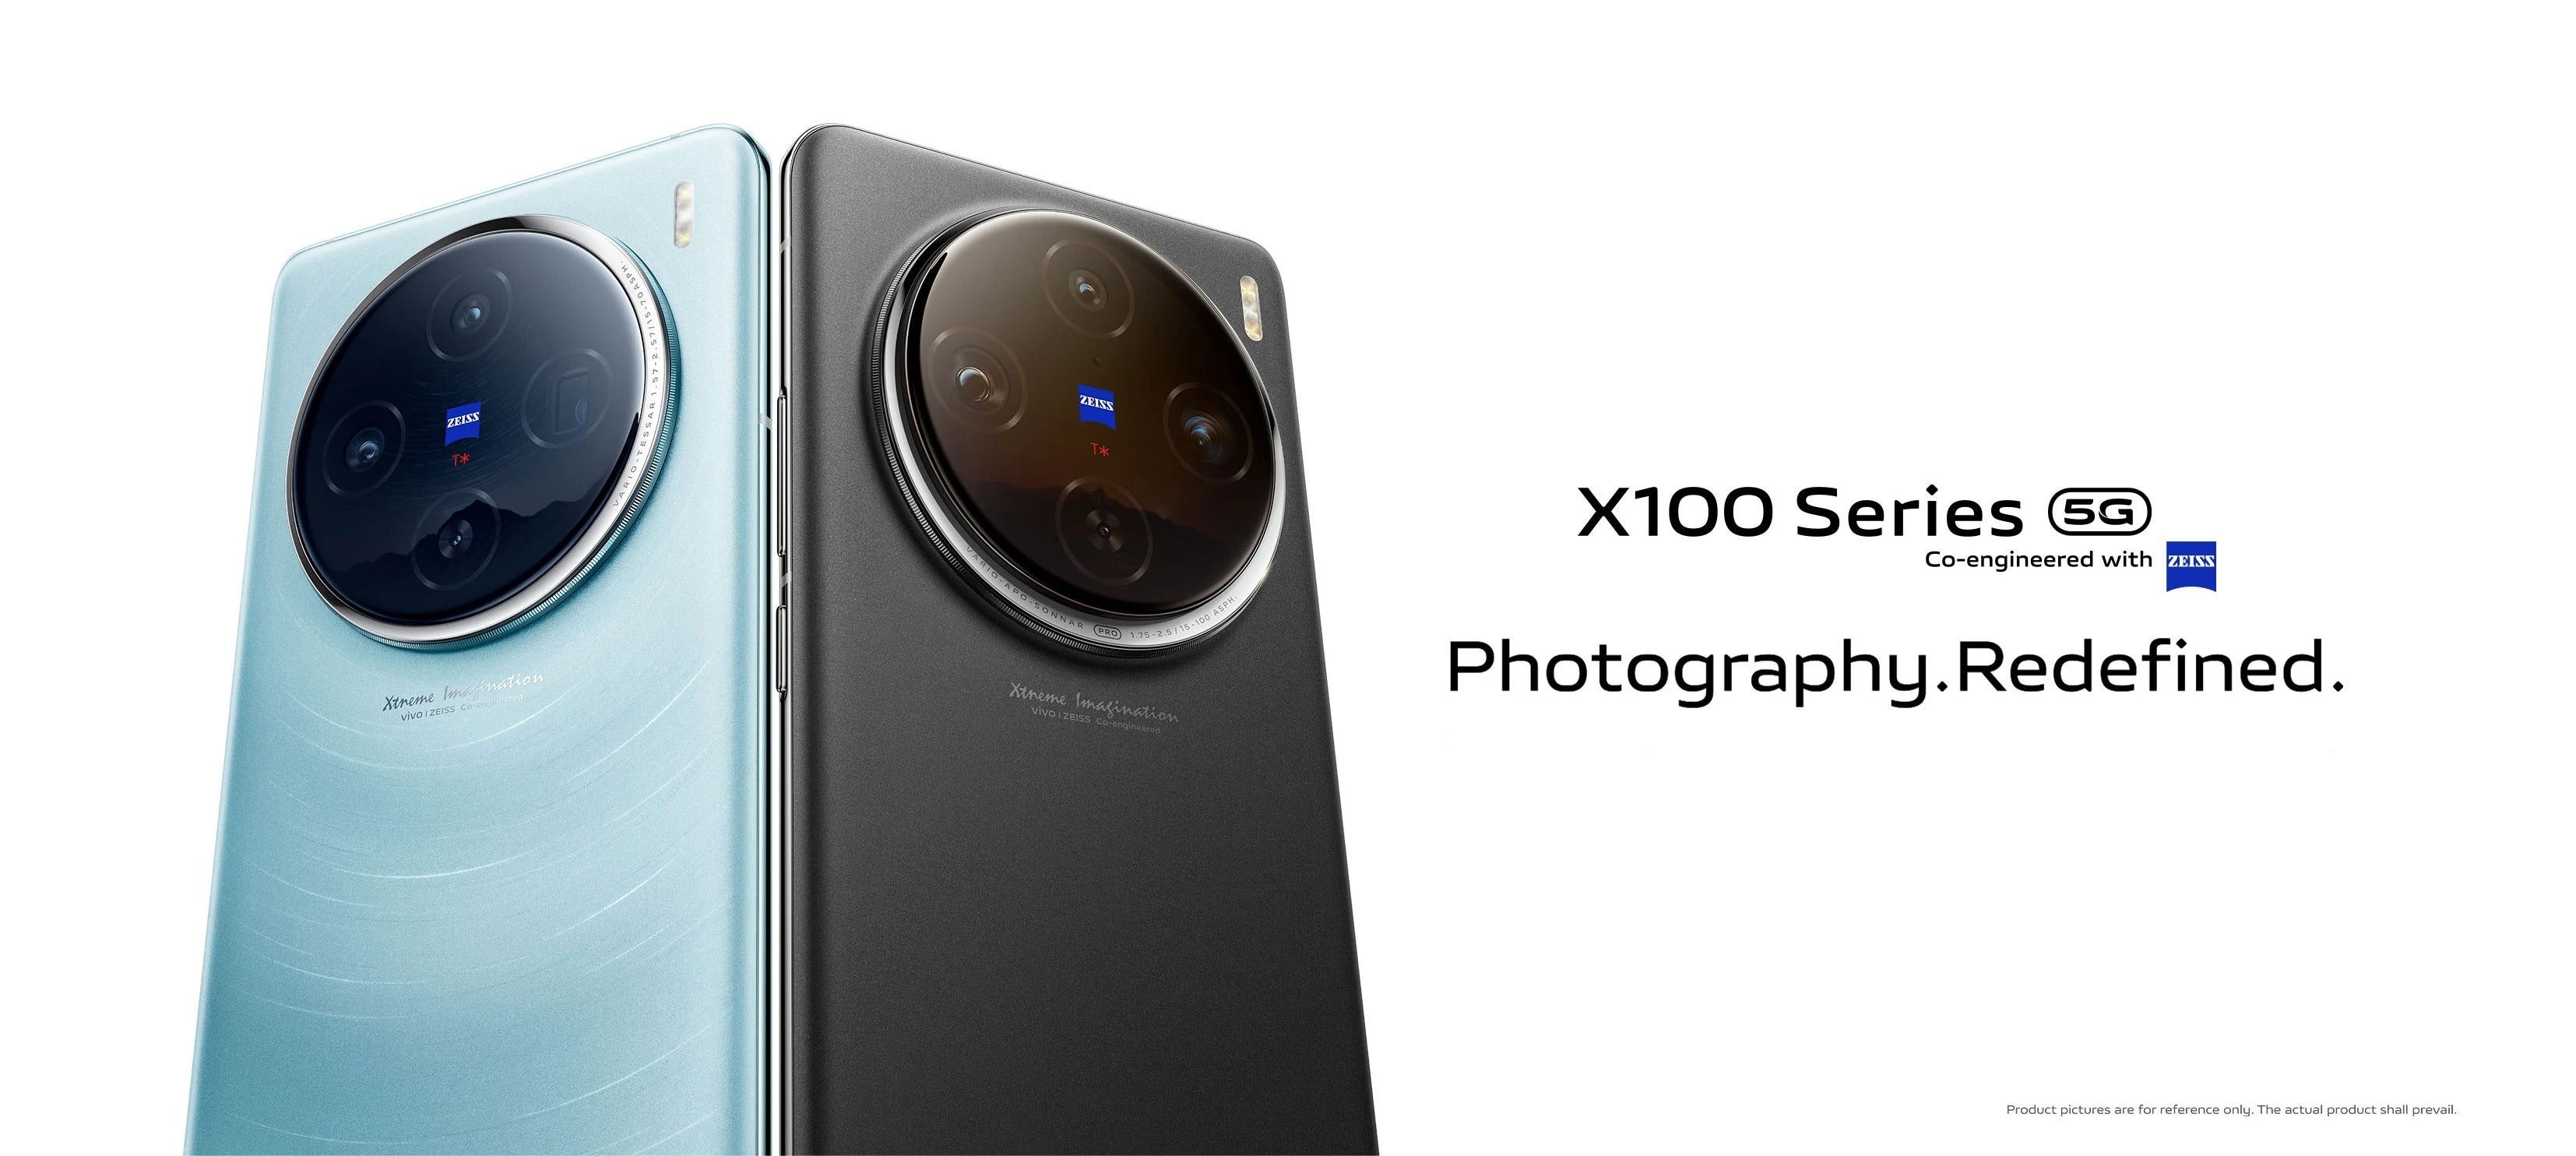 vivo X100 series camera set - Vivo X100 Pro now global with Floating Telephoto for portraits that demo who&#039;s phone camera boss